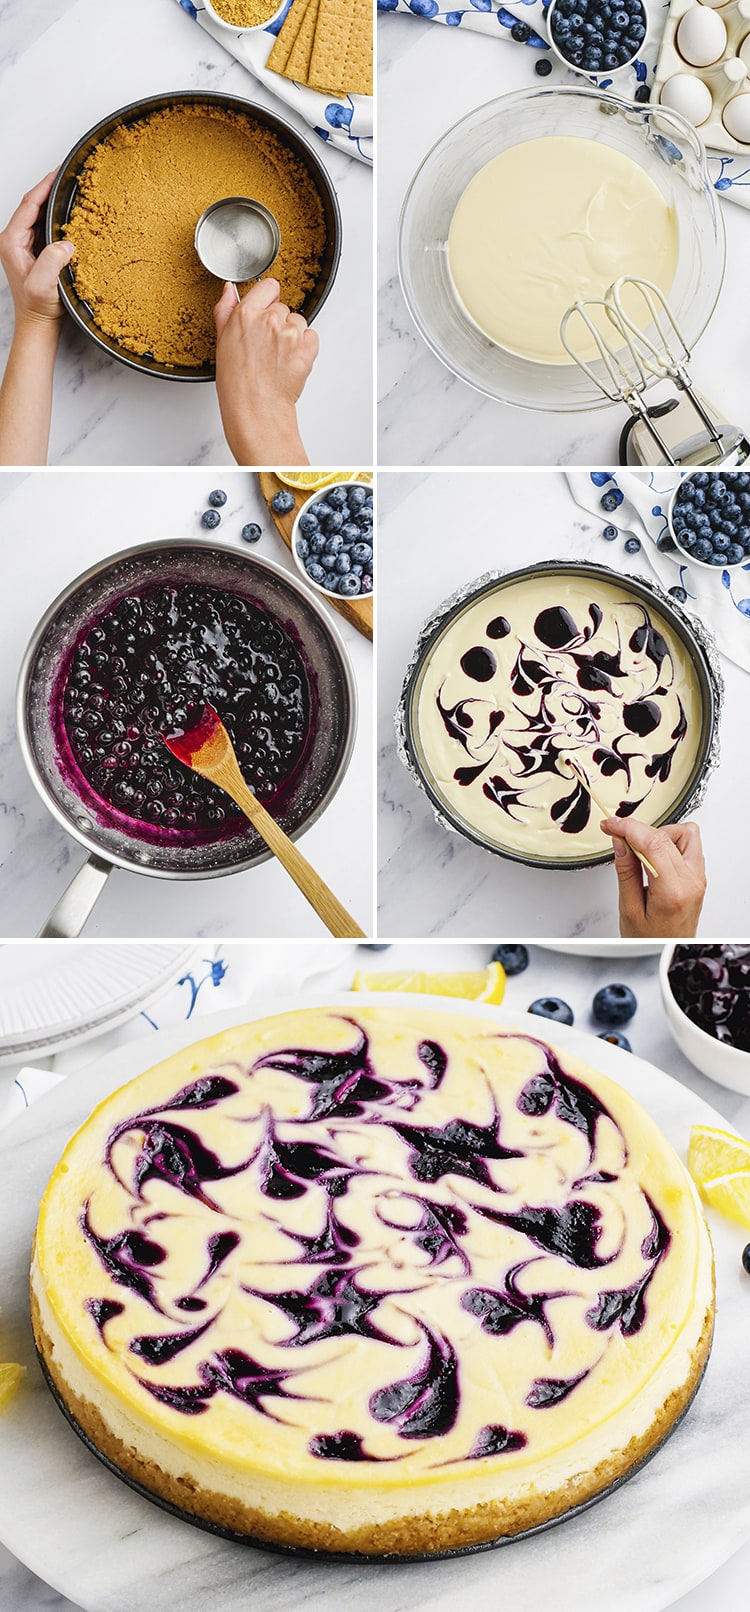 A collage of step by step images showing how to make blueberry cheesecake.